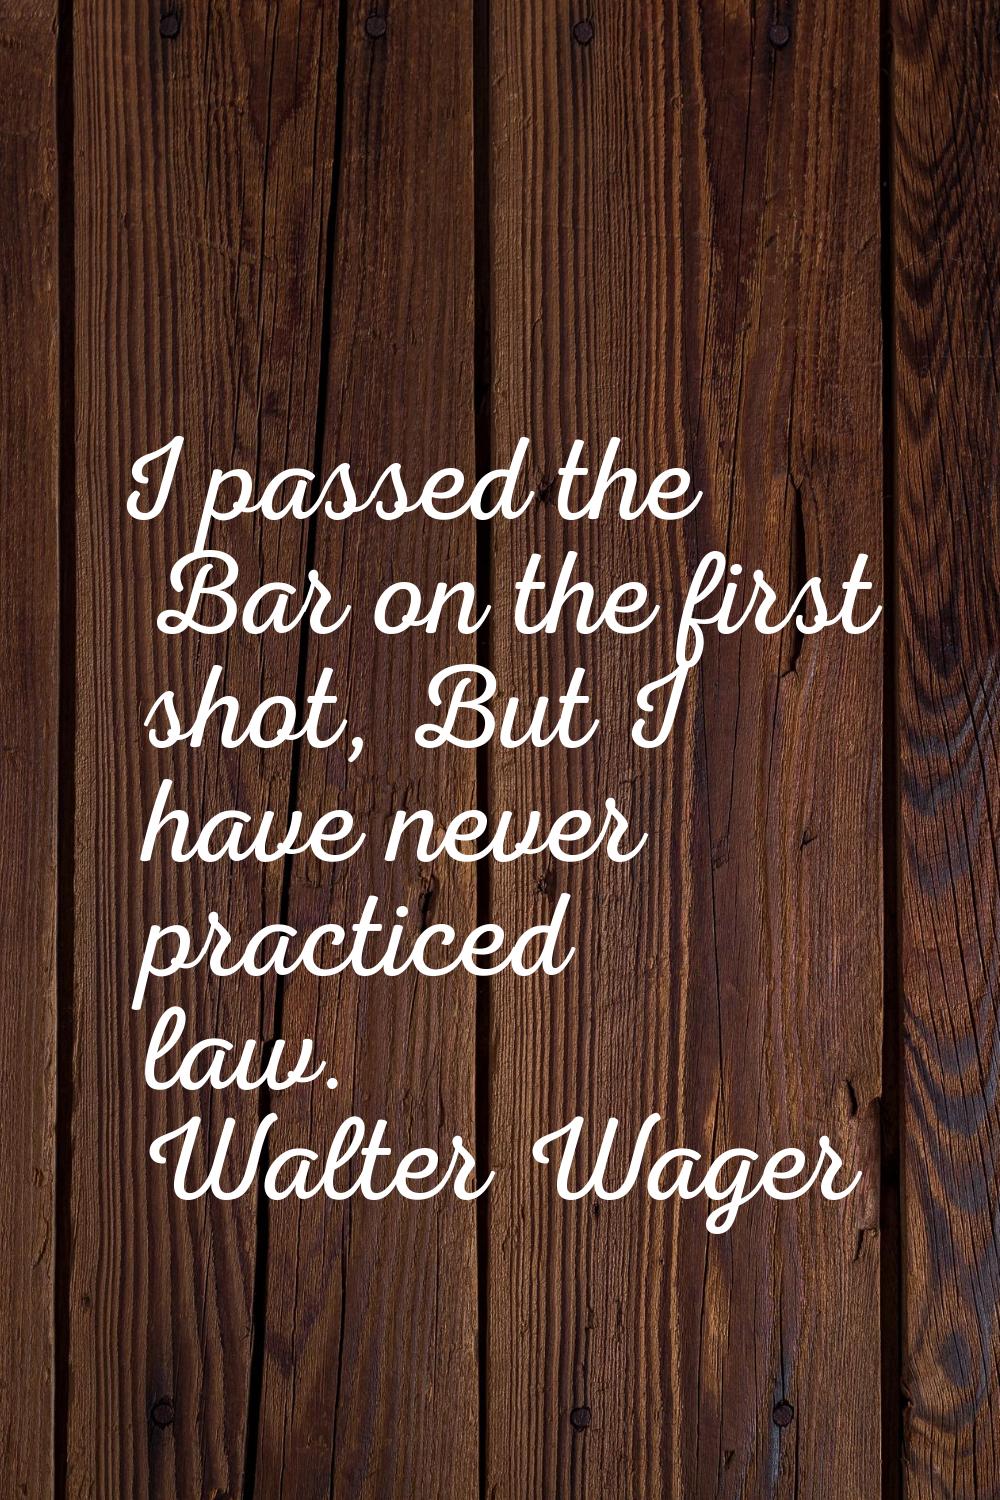 I passed the Bar on the first shot, But I have never practiced law.